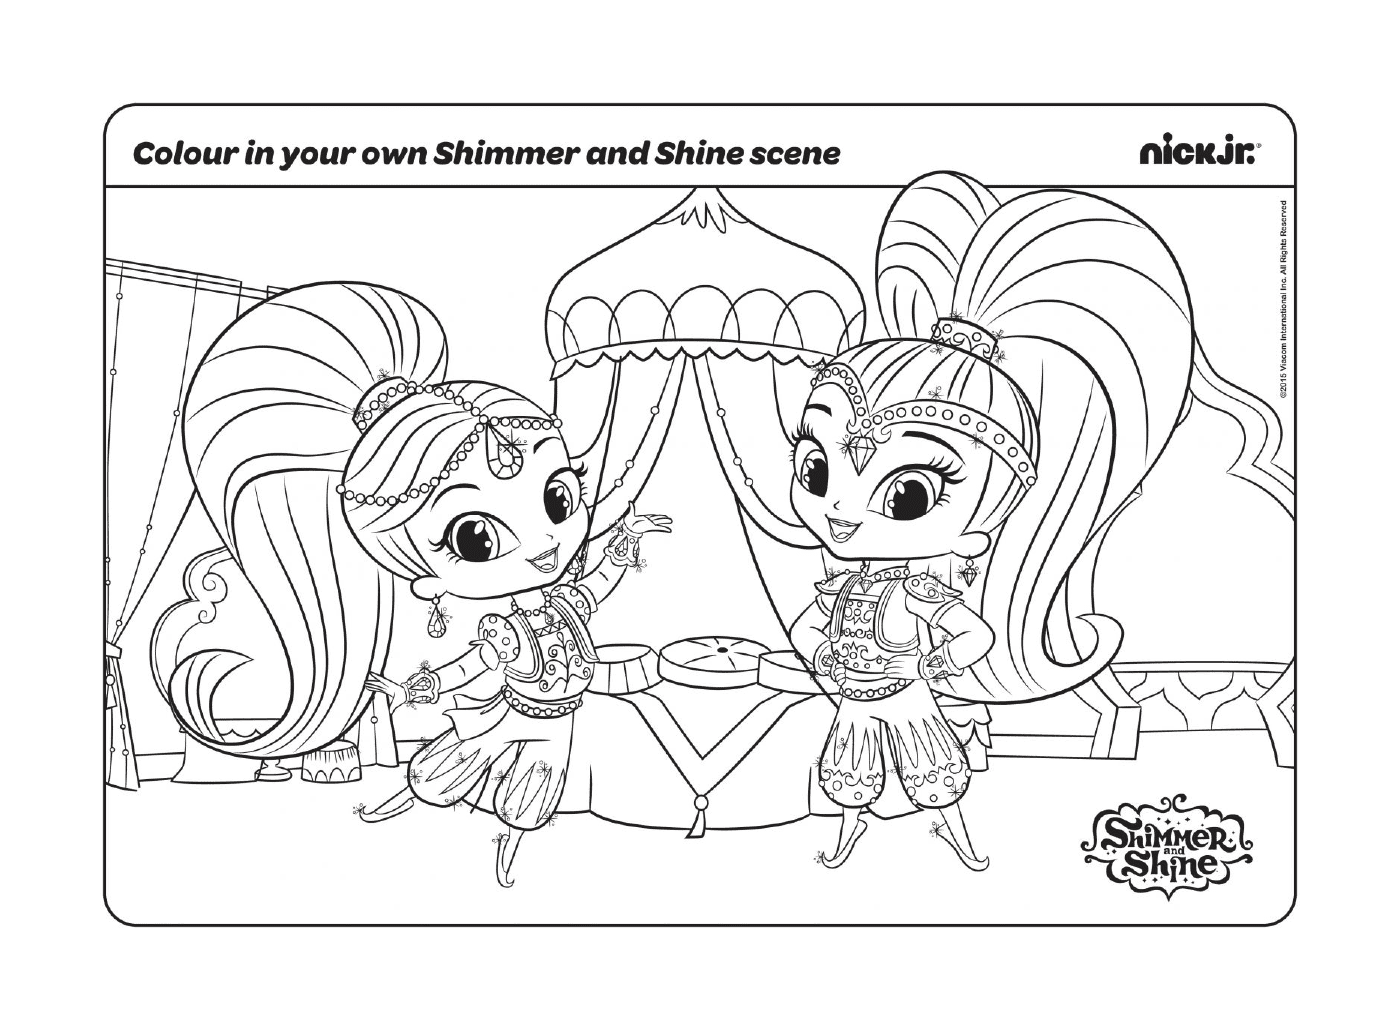  Have fun with Shimmer and Shine's coloring page 